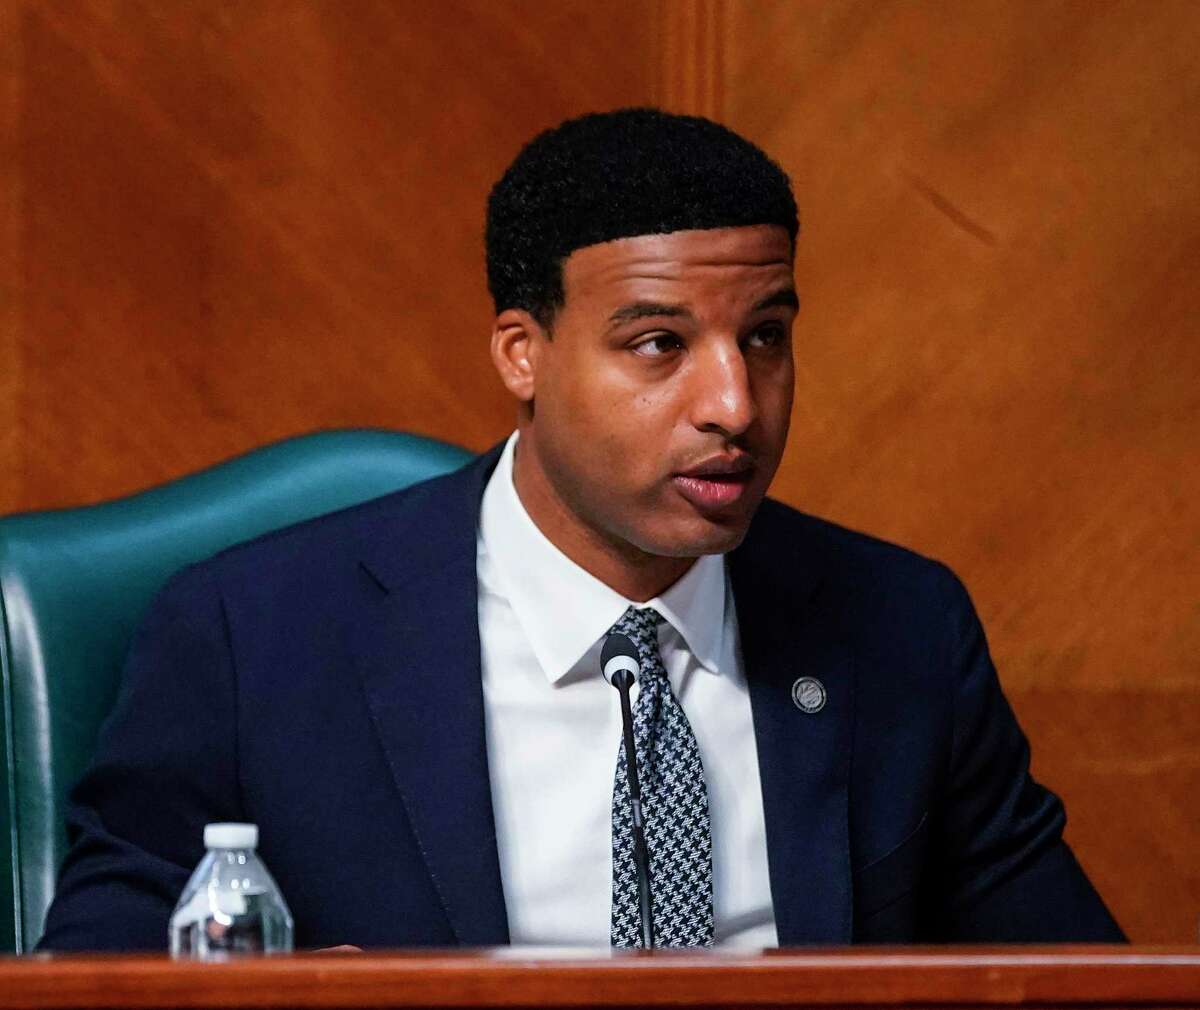 Councilmember Edward Pollard has been rumored to be interested in running for mayor. He is blocked from discussing the move by the state’s resign-to-run law, which says local officials must resign to run for another office.